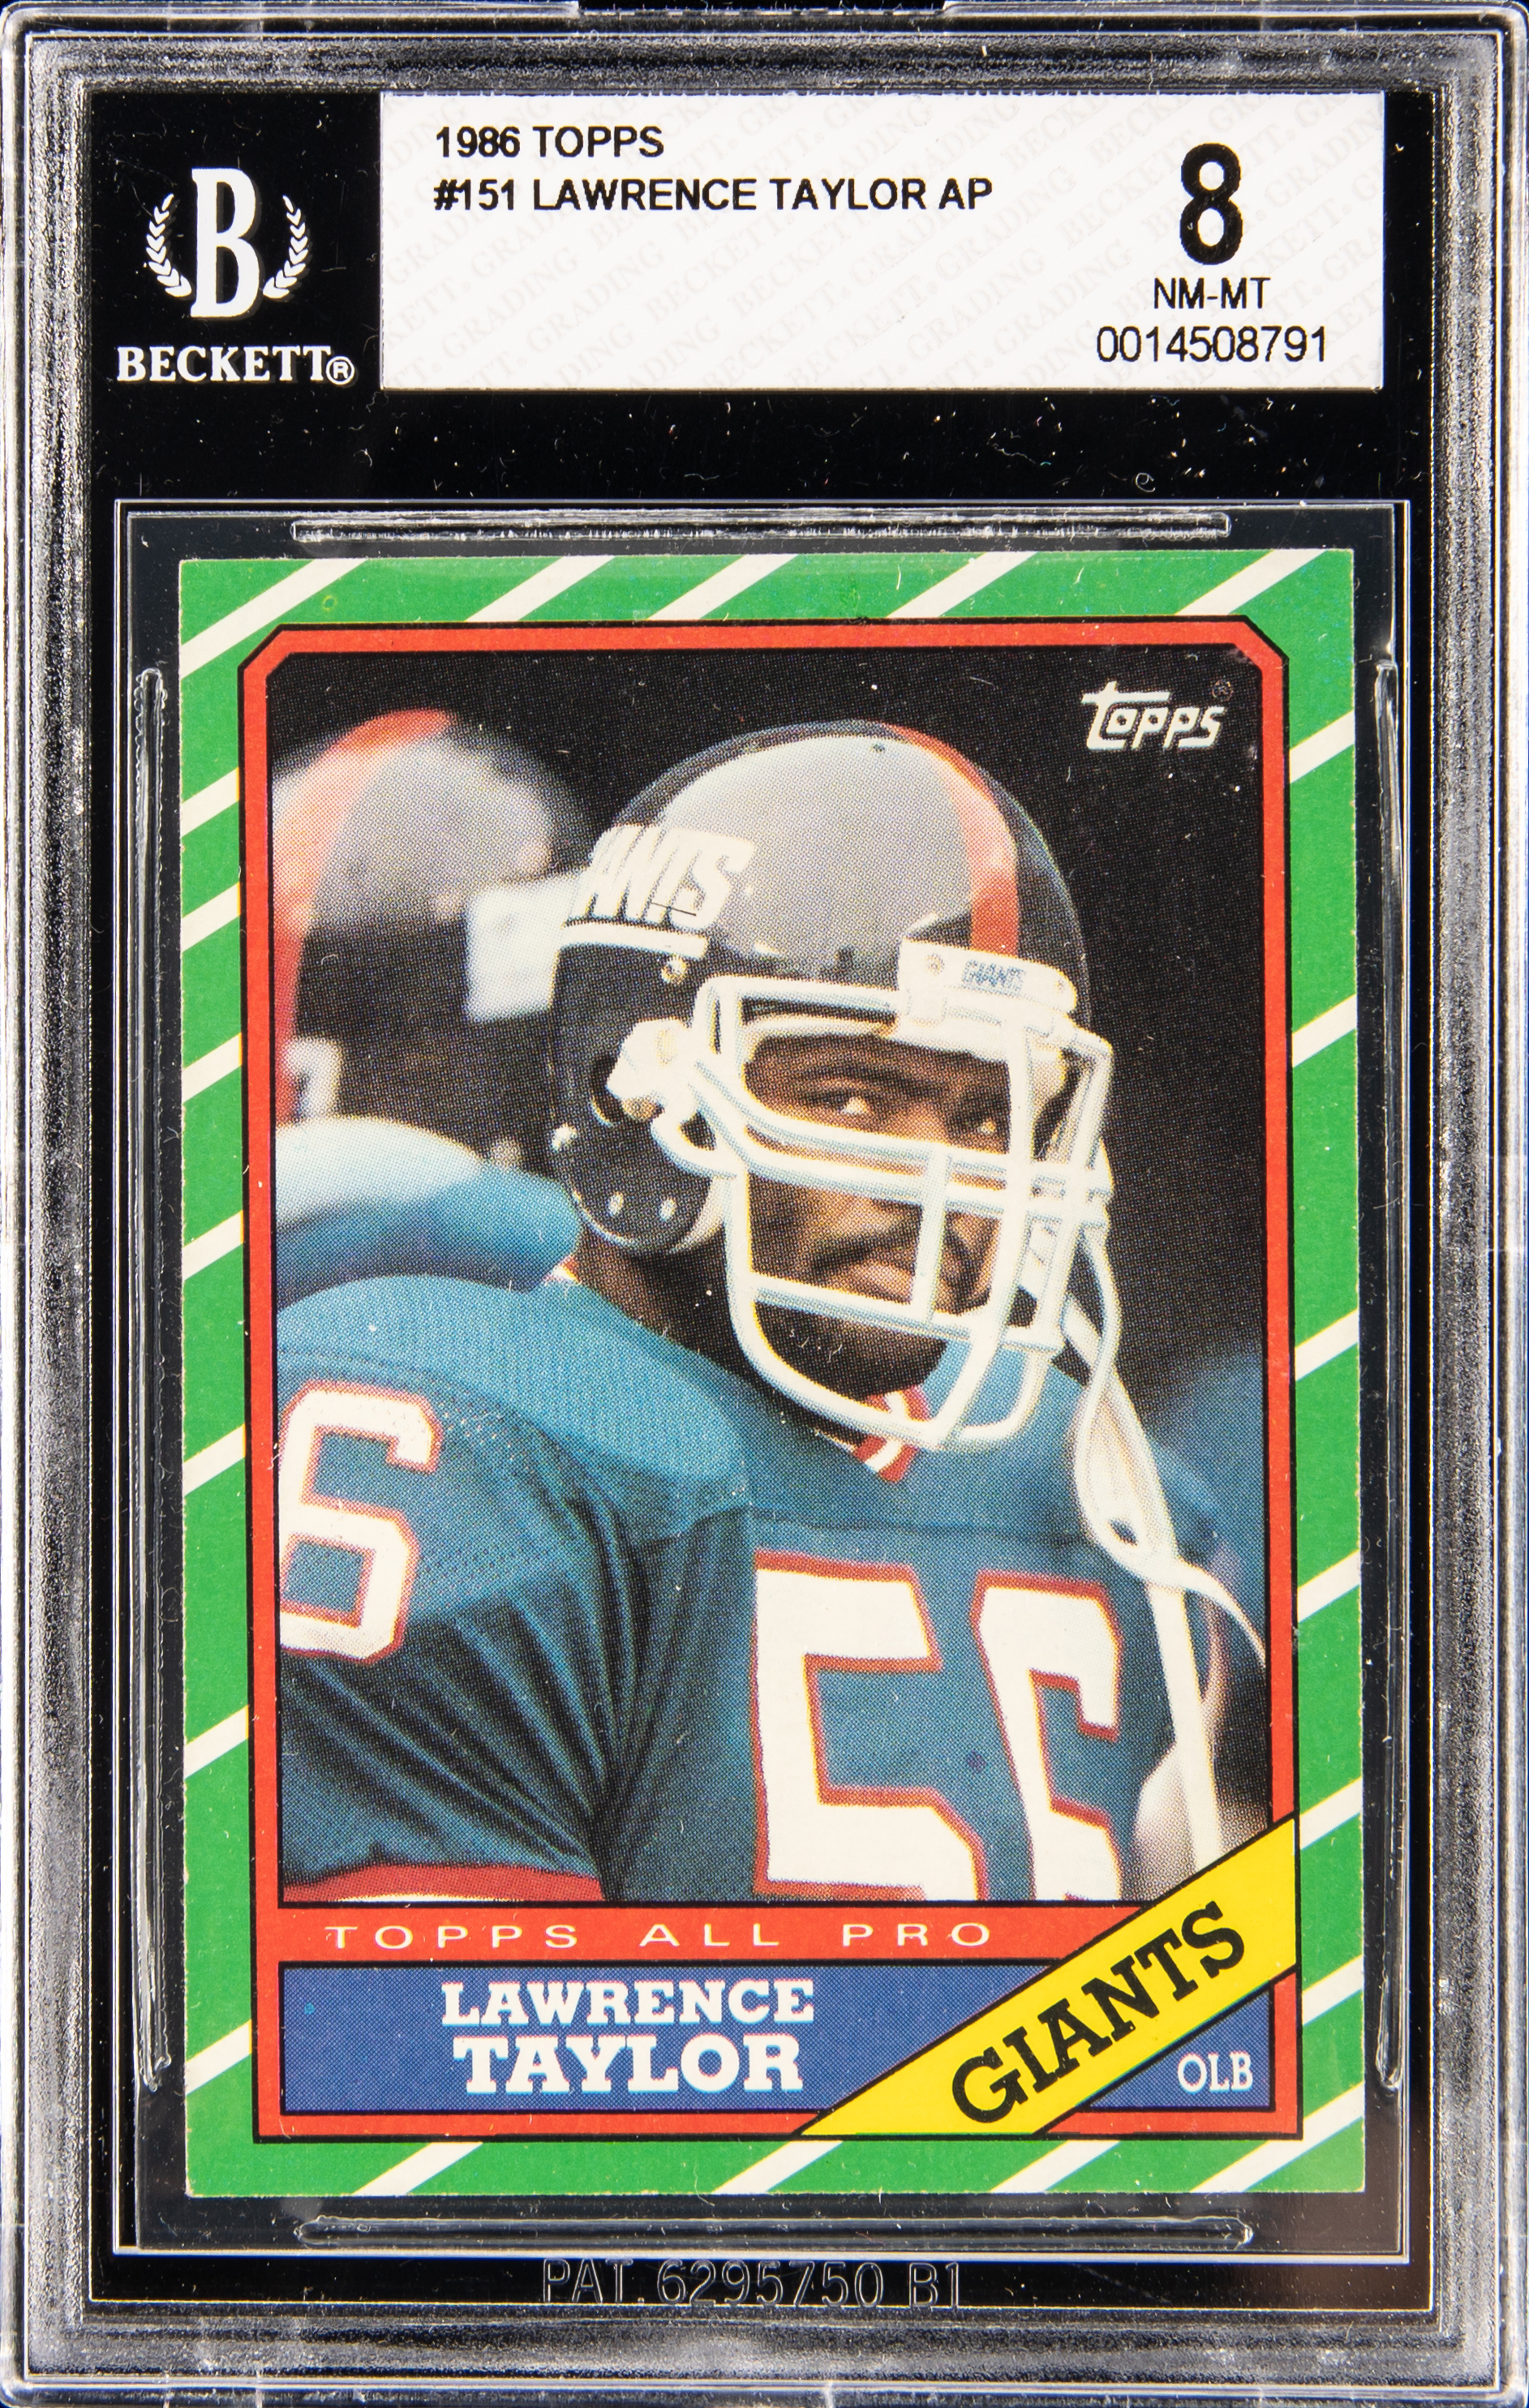 1986 Topps 151 Lawrence Taylor Ap – BGS NM-MT 8